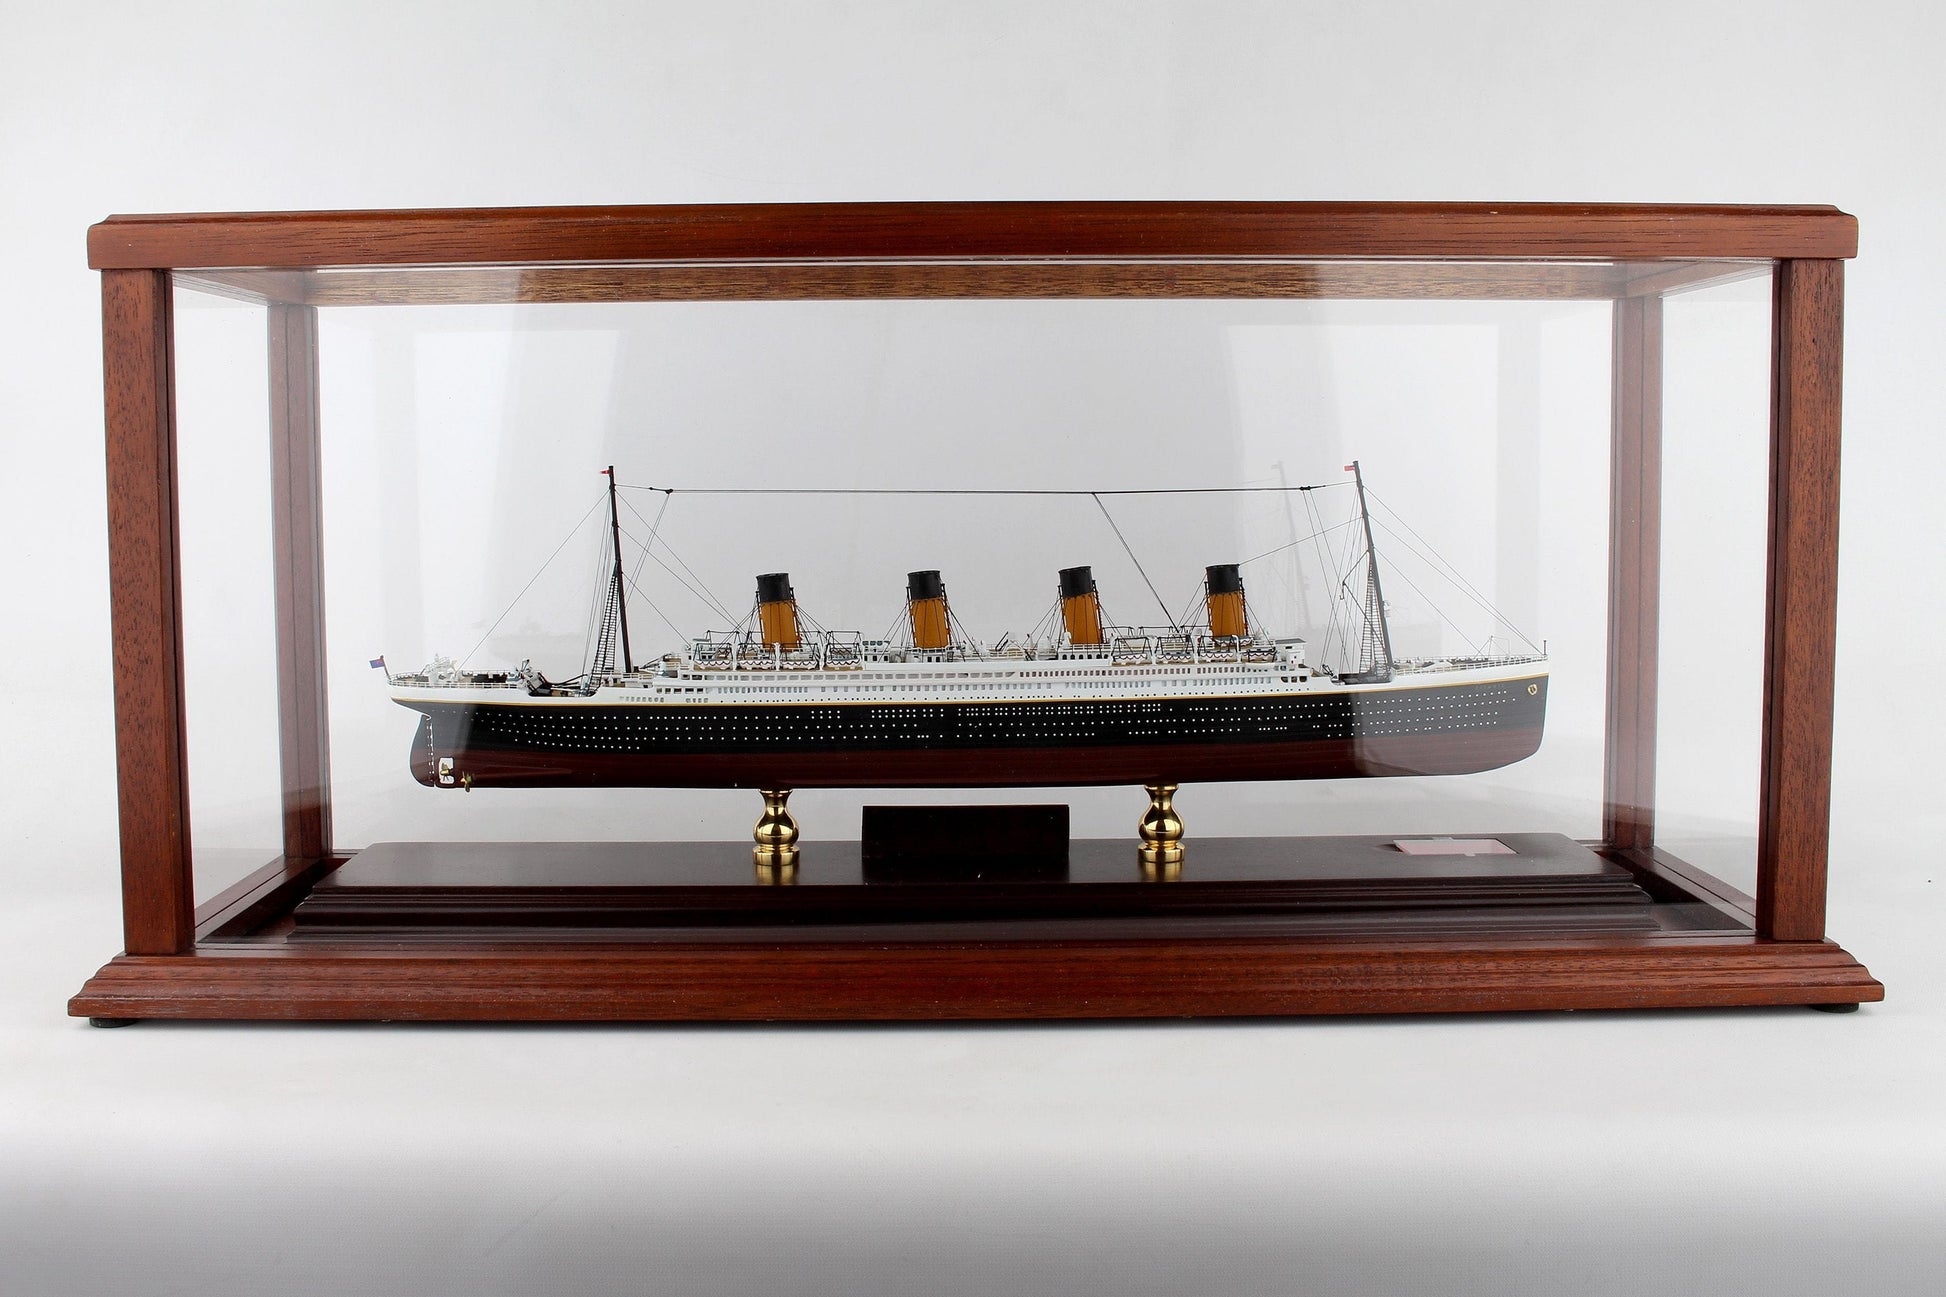 ALDO Hobbies & Creative Arts> Collectibles> Scale Model RMS Titanic medium Passenger Ship Ocean Liner Wood Model Assembled With Display Case and Real Artifact From the Ship